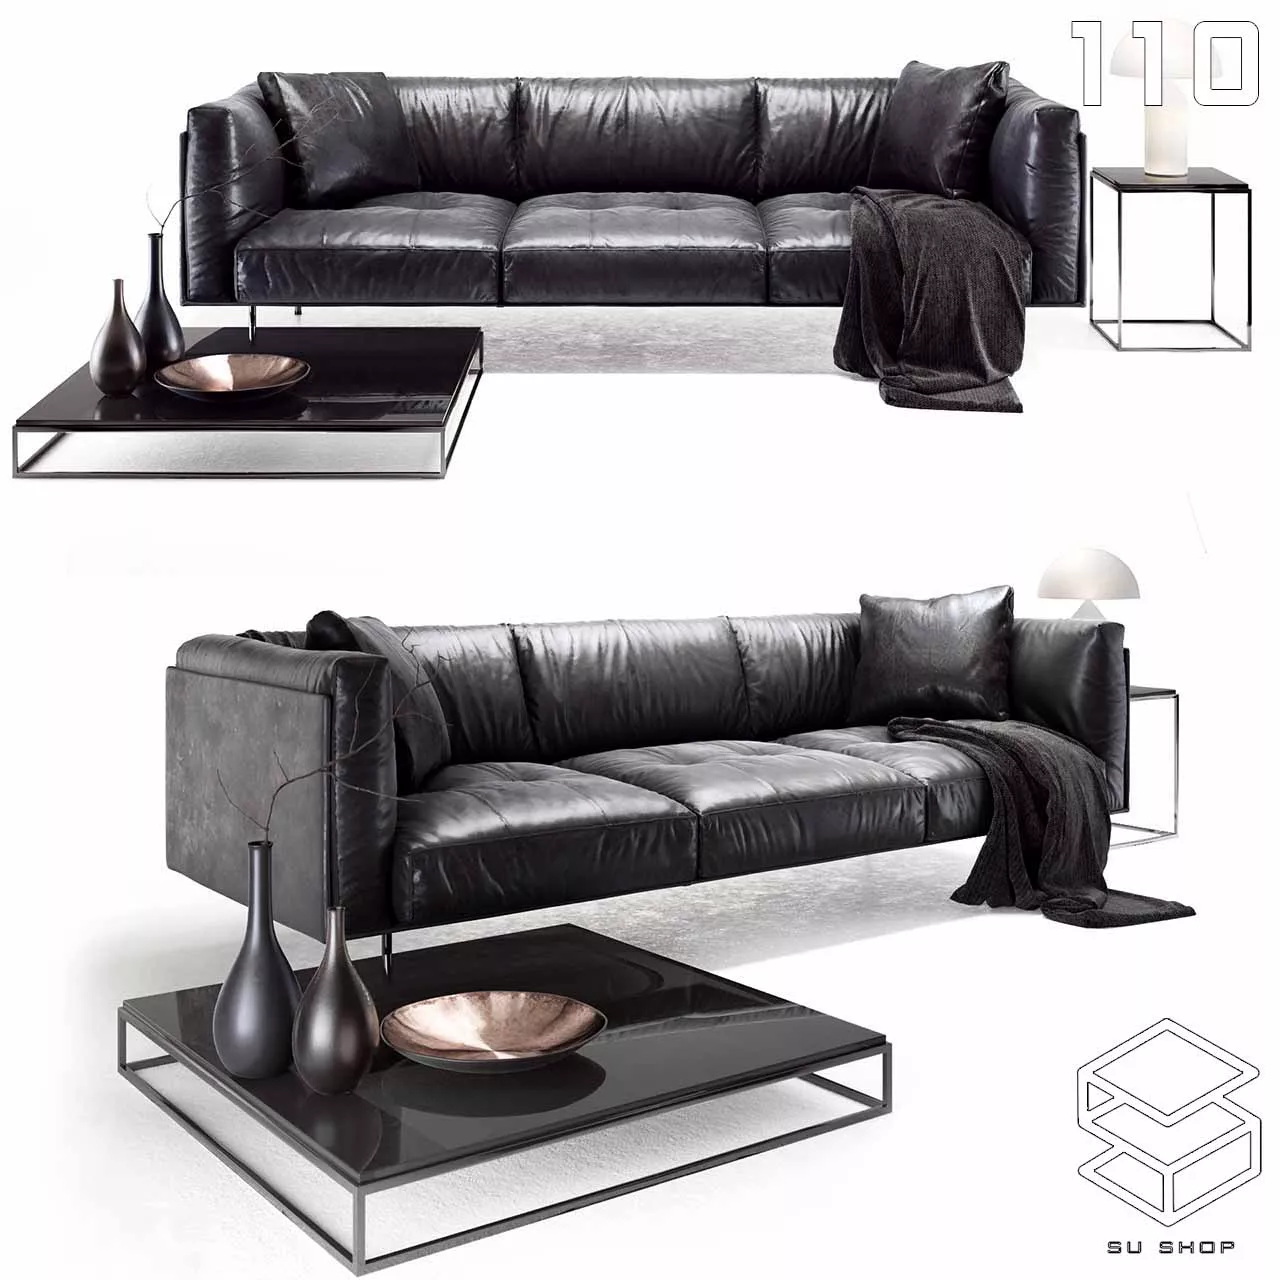 MODERN SOFA - SKETCHUP 3D MODEL - VRAY OR ENSCAPE - ID13398